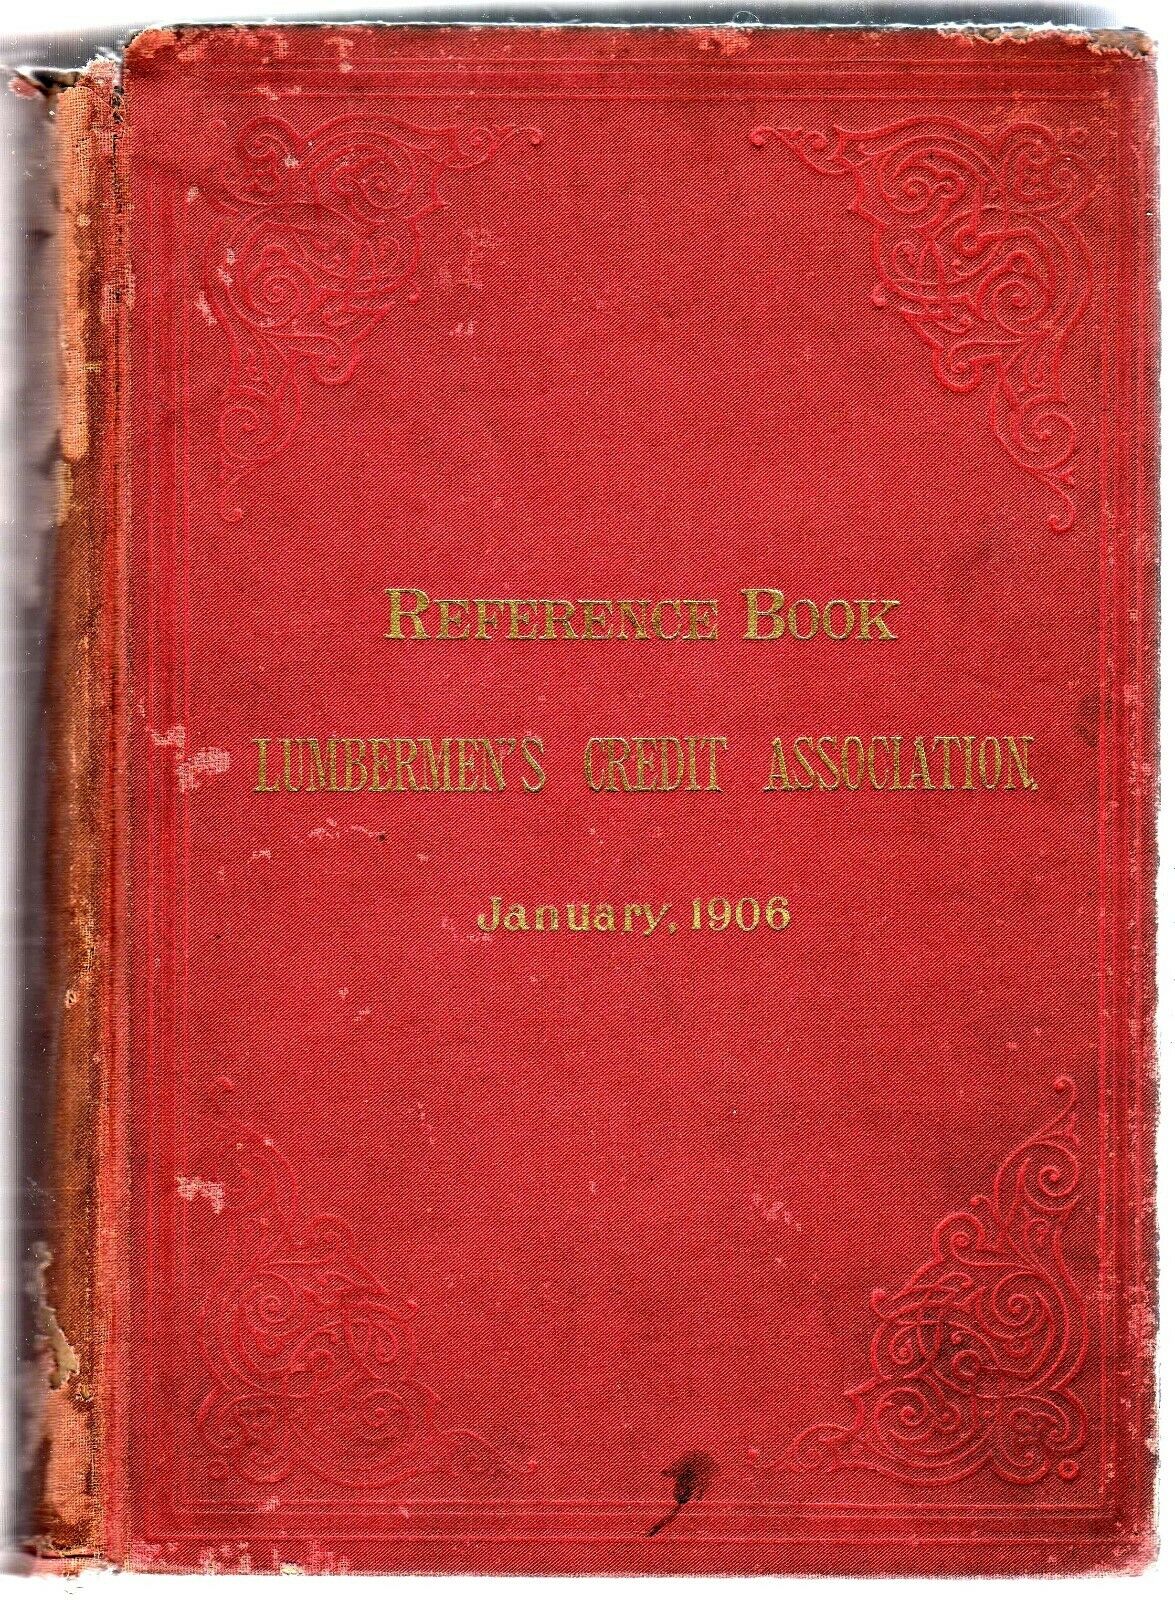 1906 Lumbermans Credit Reference Book: Usa Nationwide: 100s Of Pages: Complete